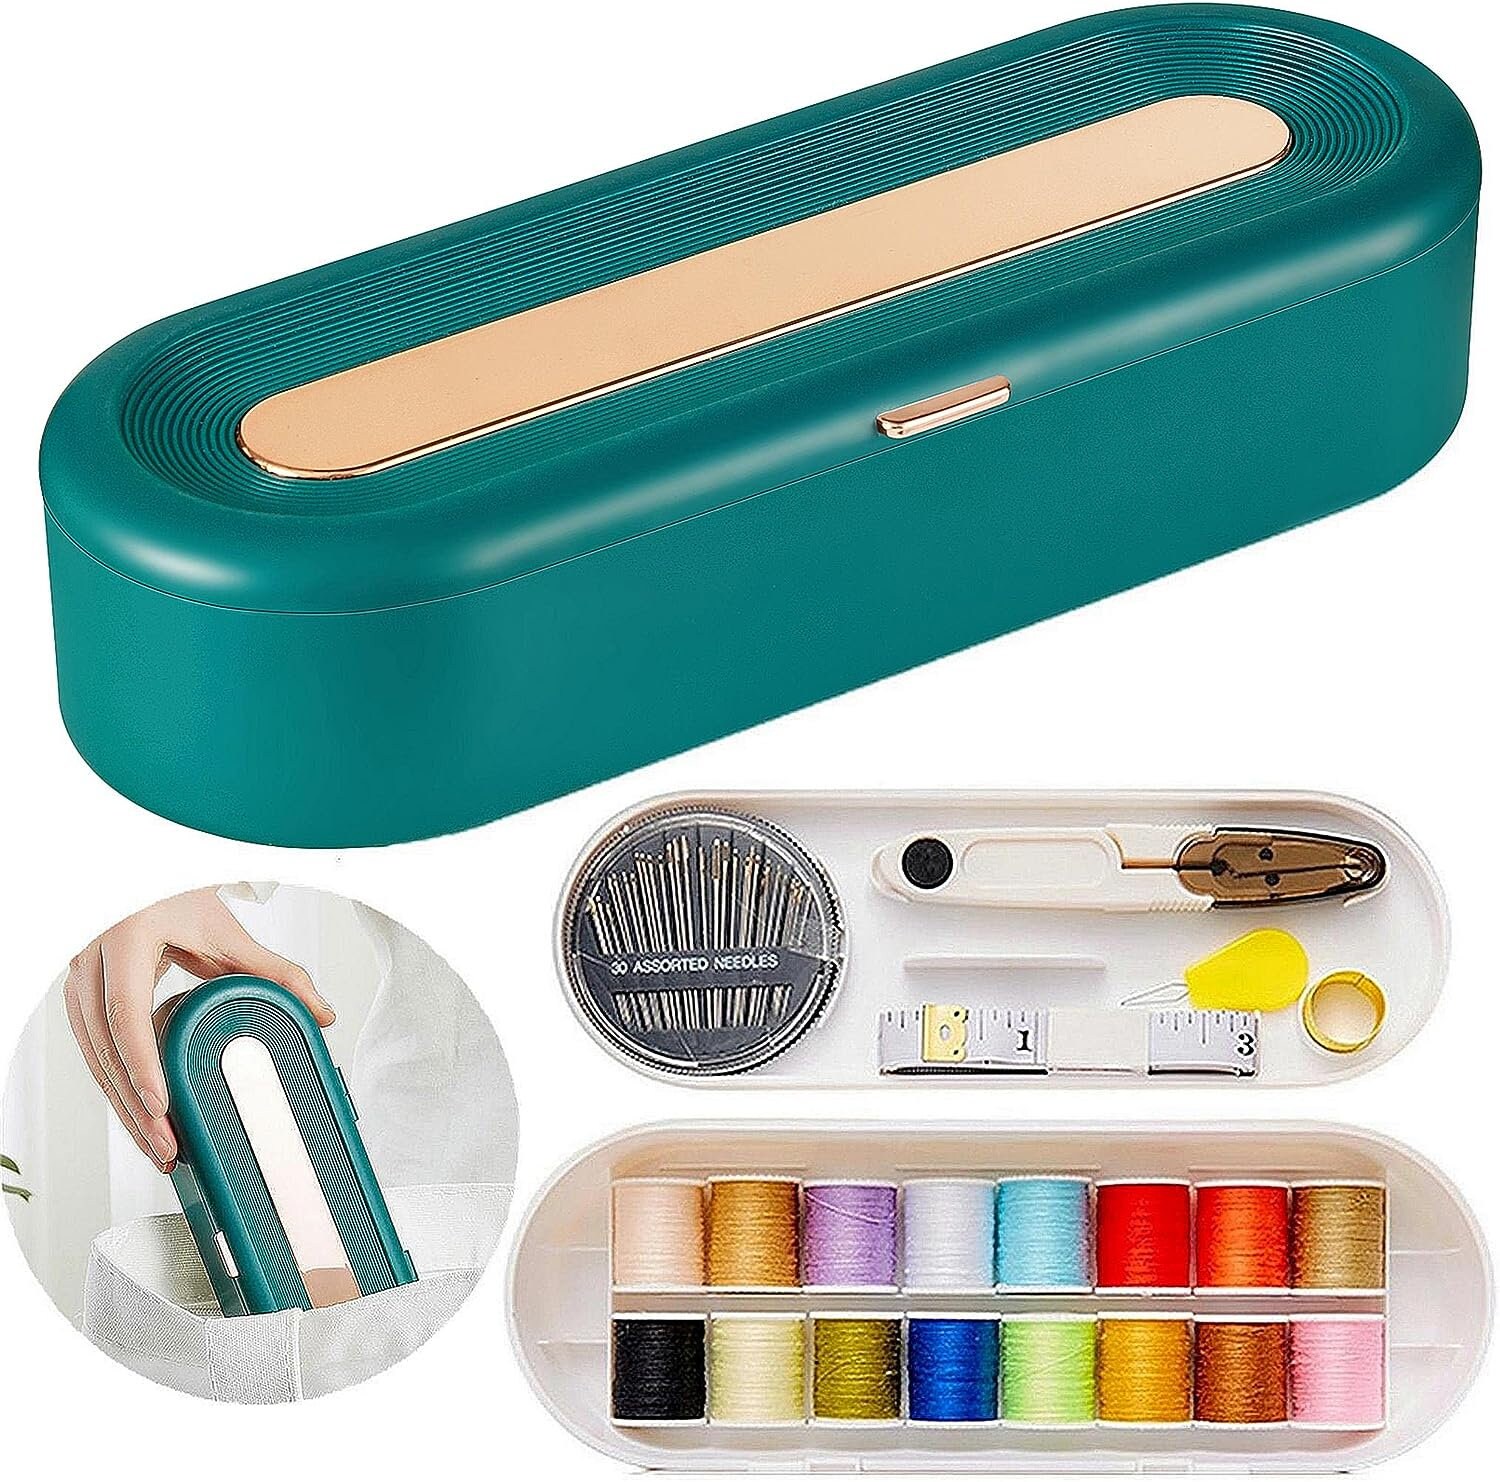 Vellostar VelloStar Sewing Kit for Adults - Over 100 Sewing